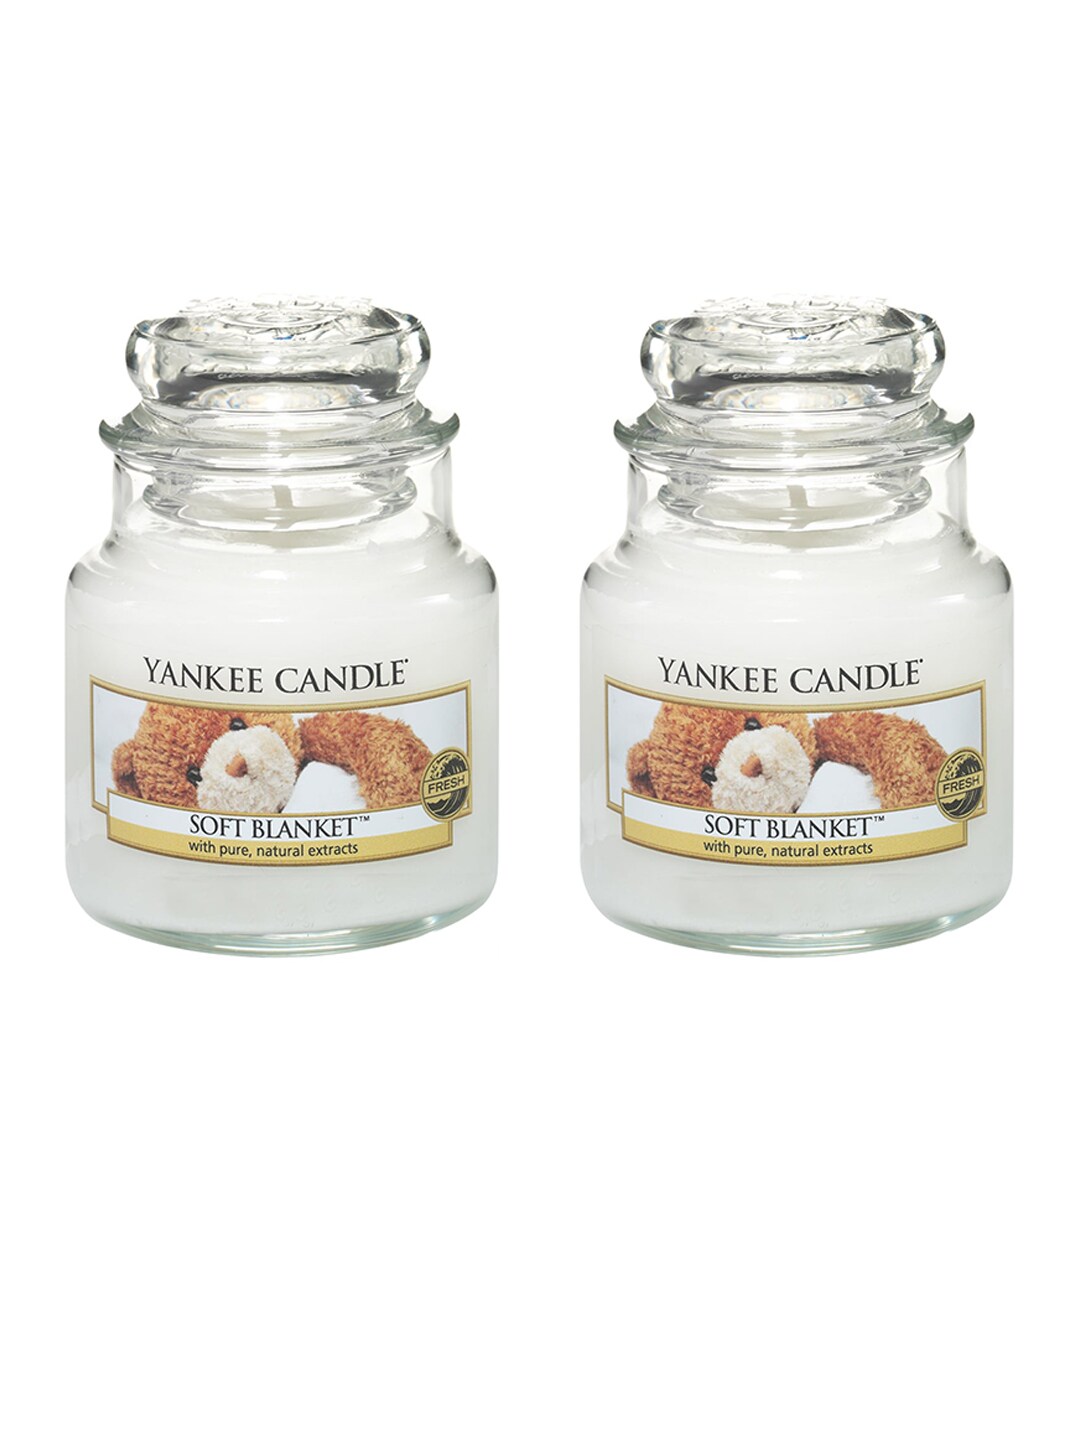 YANKEE CANDLE Set Of 2 White Solid Soft Blanket Scented Jar Candles Price in India